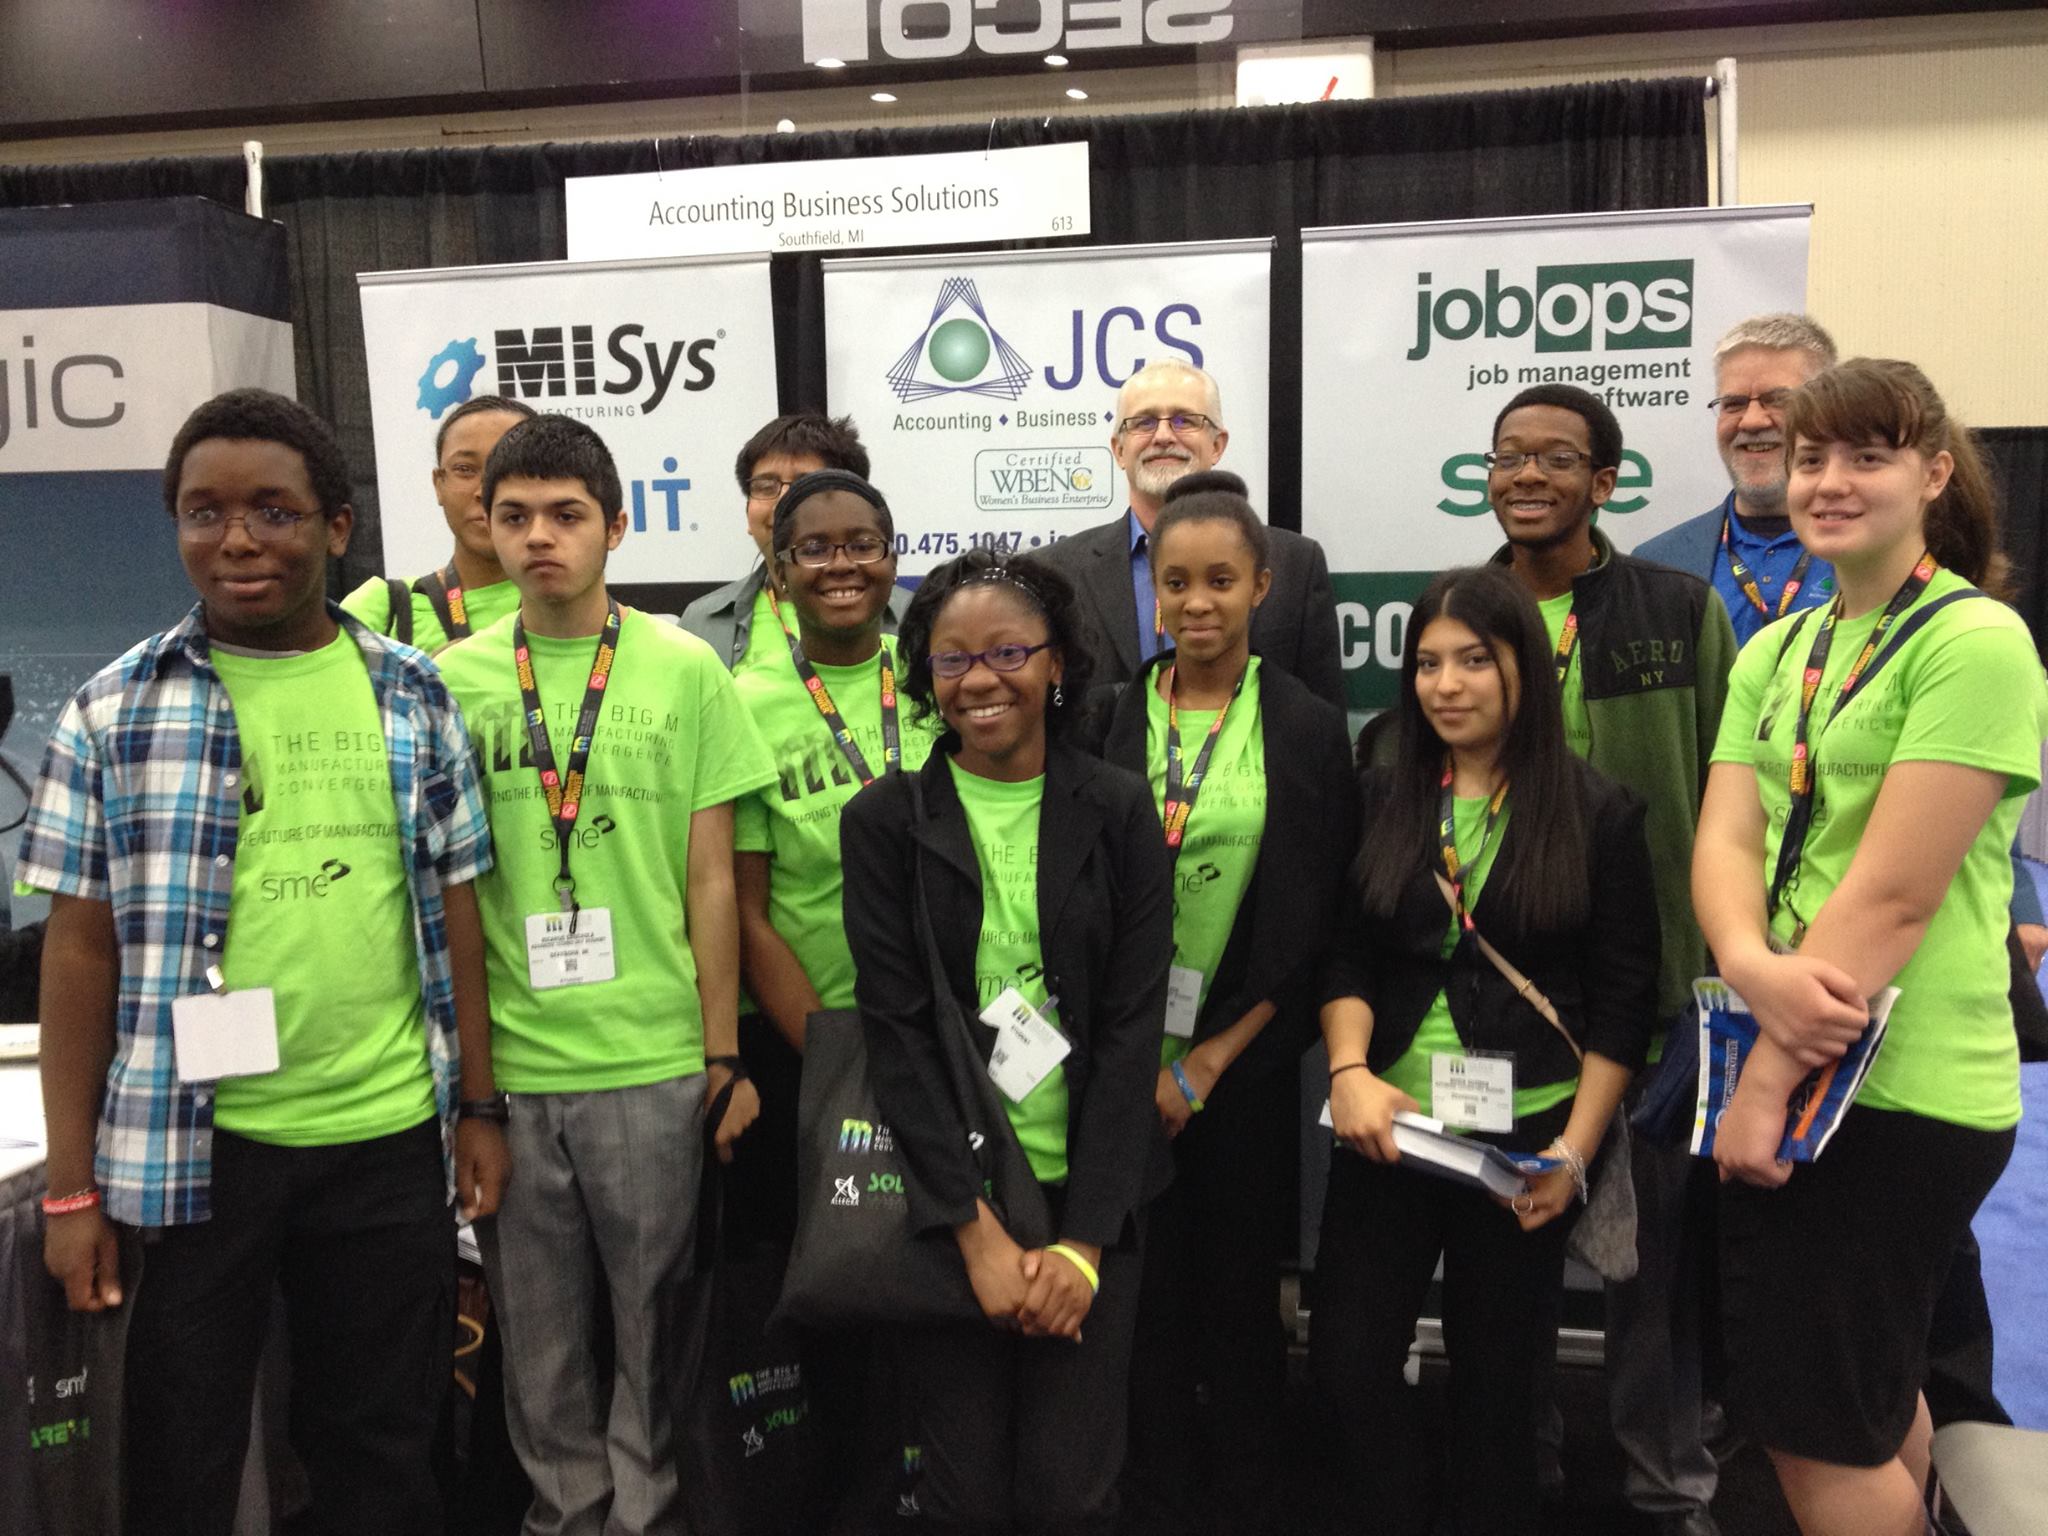 Local students attend trade show for a manufacturing software demonstation